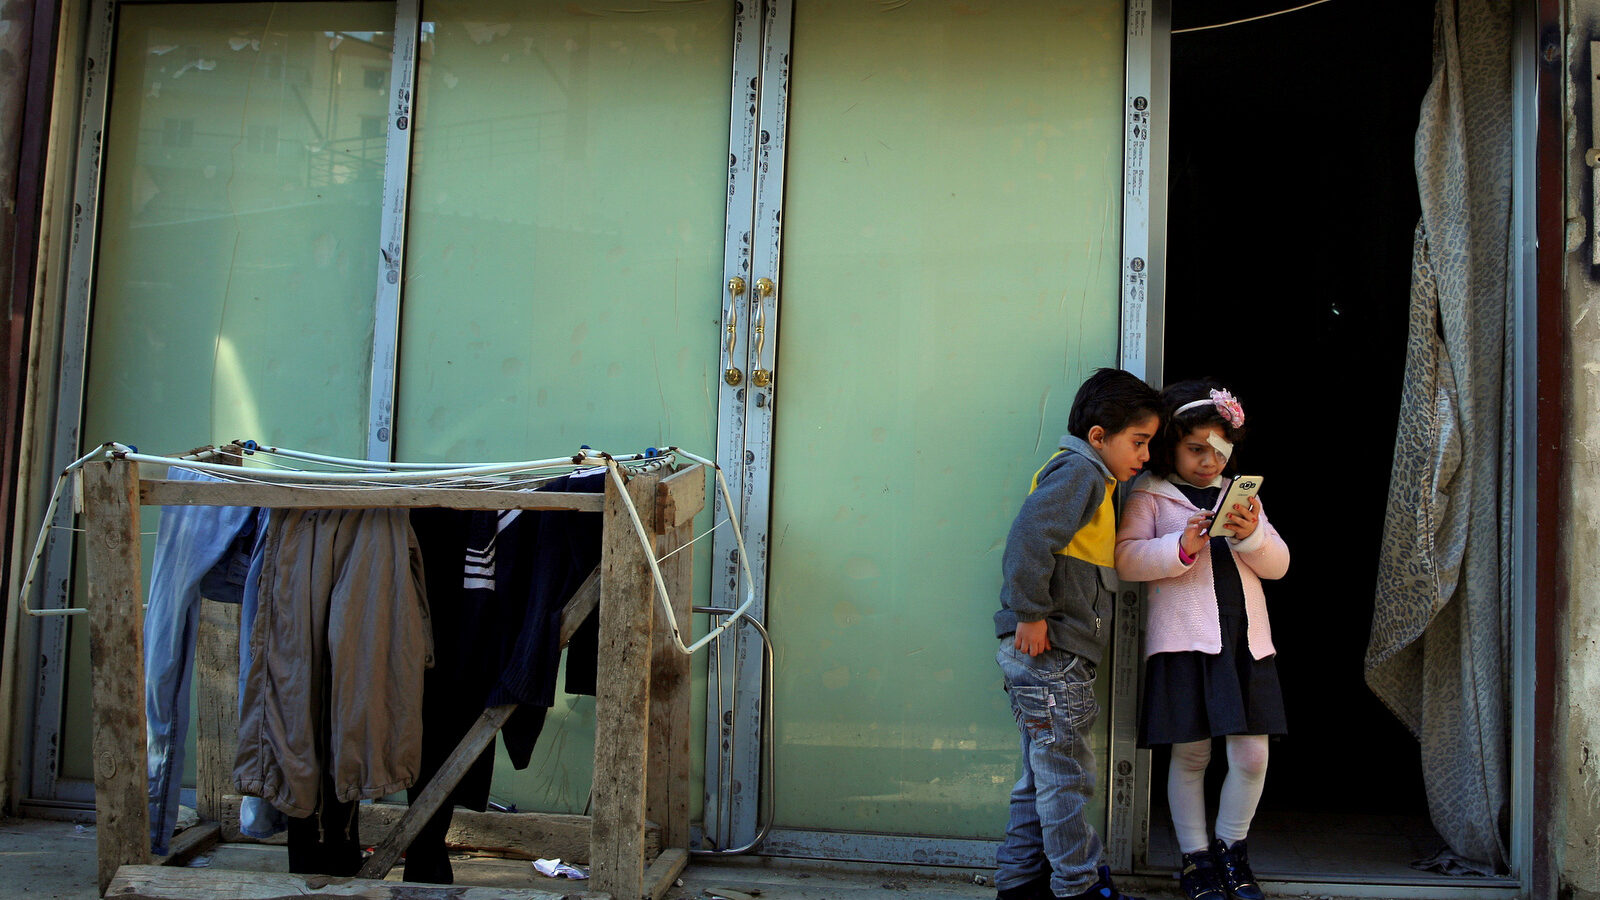 In this Tuesday, Feb. 2, 2016 photo, Syrian refugee Falak al Hourani, 7, right, and her brother Hussein Hourani, 6, who fled with their family from Homs in Syria, stand at the entrance to a shop that has been turned into a home, in the northern city of Tripoli, Lebanon. Falak, suffering from a rare form of eye cancer arrived in Italy on Thursday, the first of an estimated 1,000 refugees who are being brought here on humanitarian grounds in a pilot project aimed at dissuading people from embarking on deadly sea crossings. (AP Photo/Bilal Hussein)